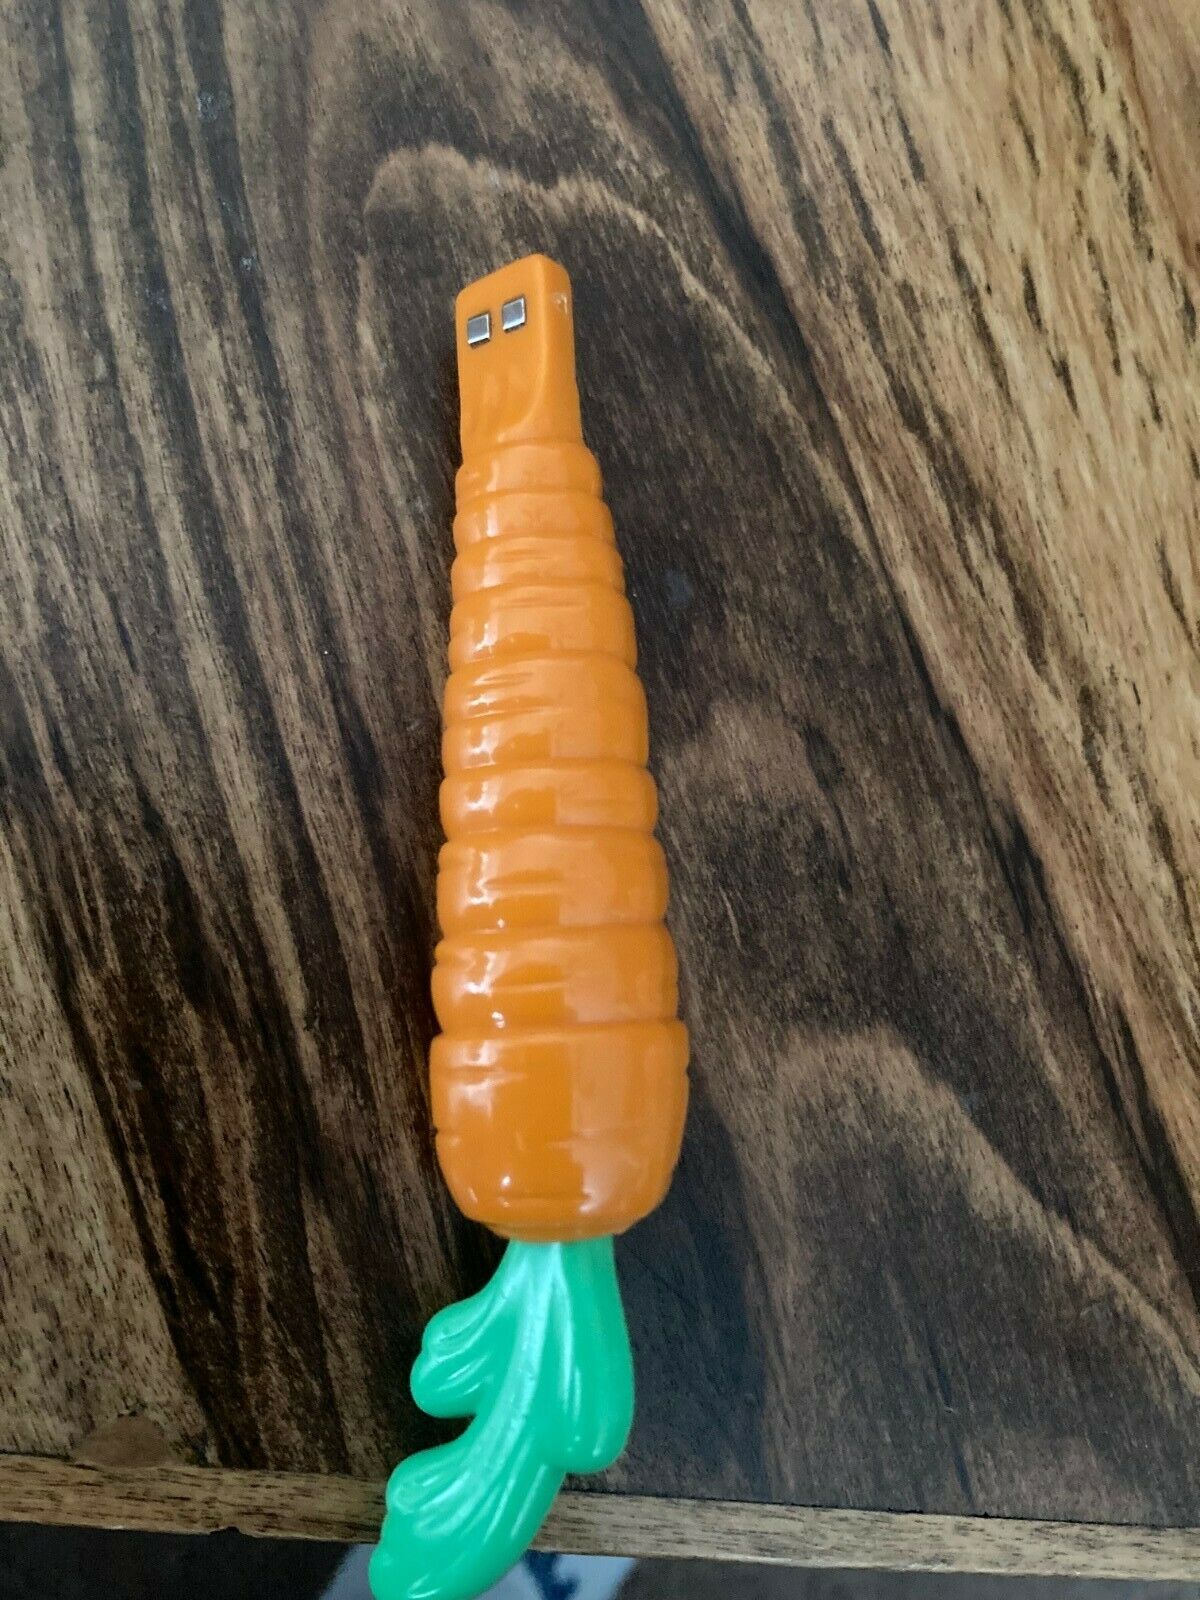 1998 Playmates Amazing Amy Interactive Doll Carrot Replacement Accessory